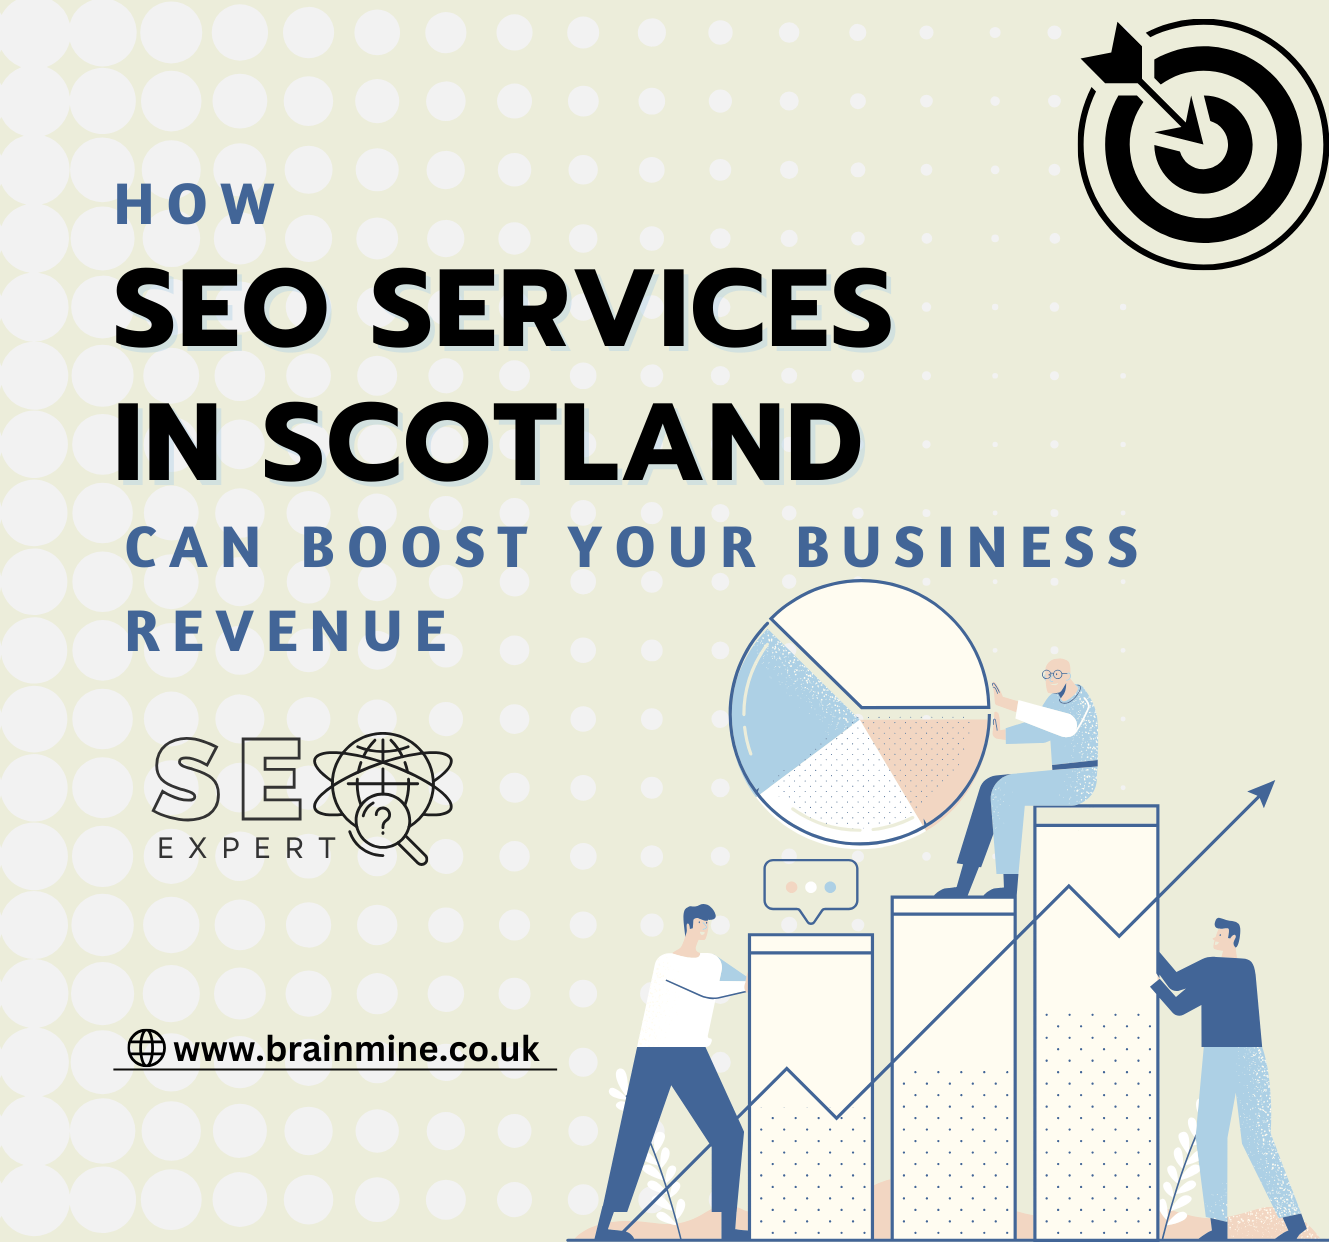 SEO Services in Scotland Can Boost Your Business Revenue